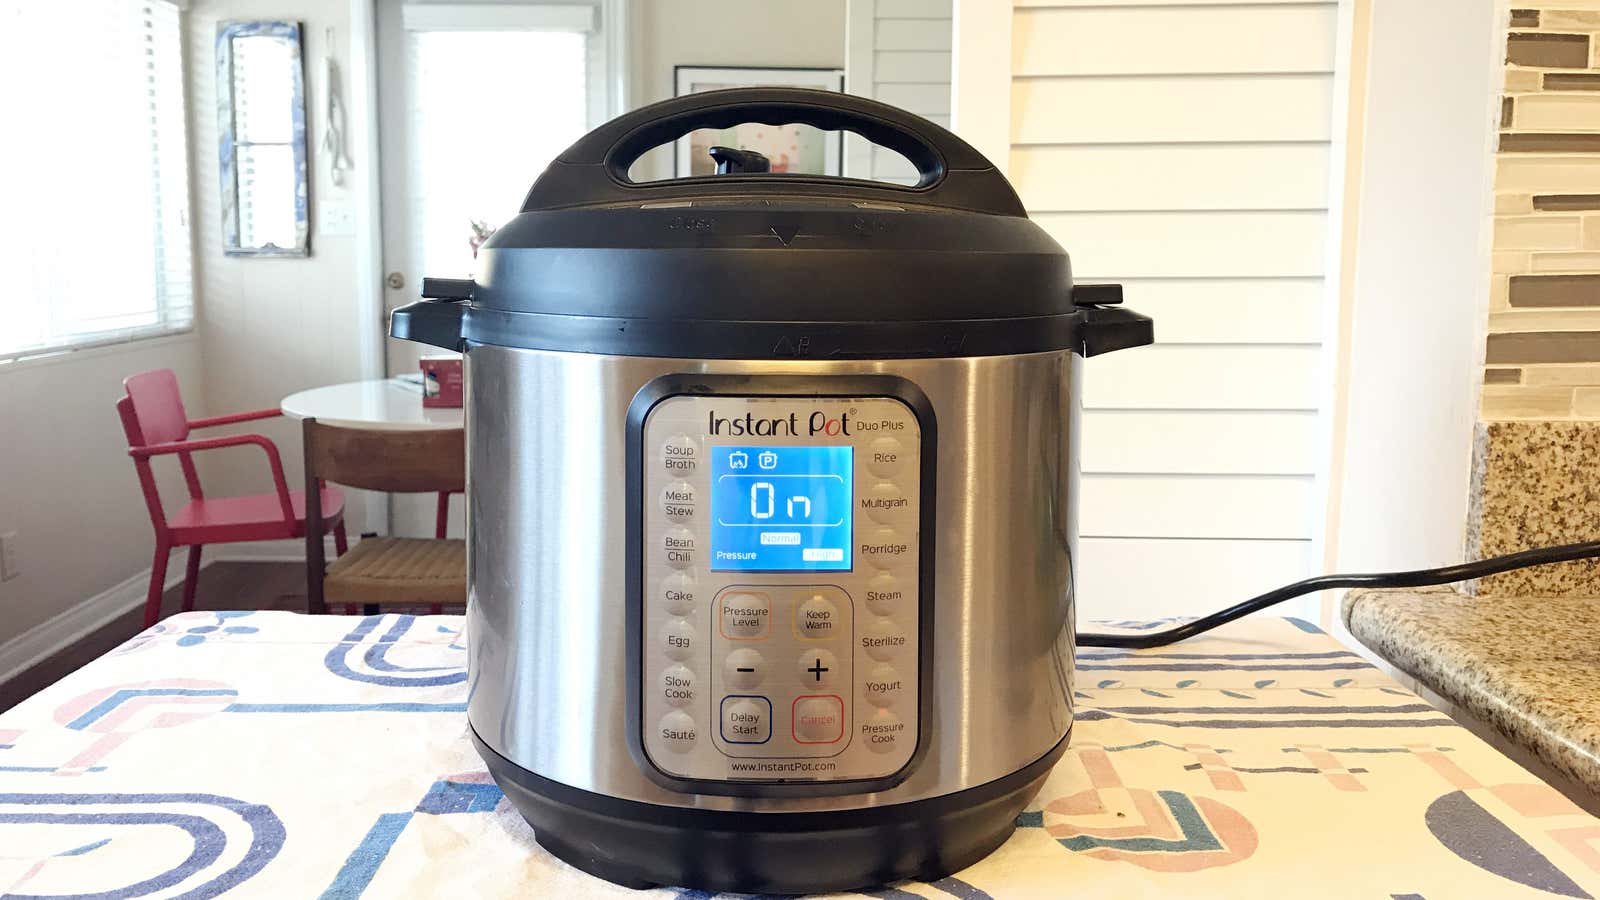 A brand-new Instant Pot, ready for action.